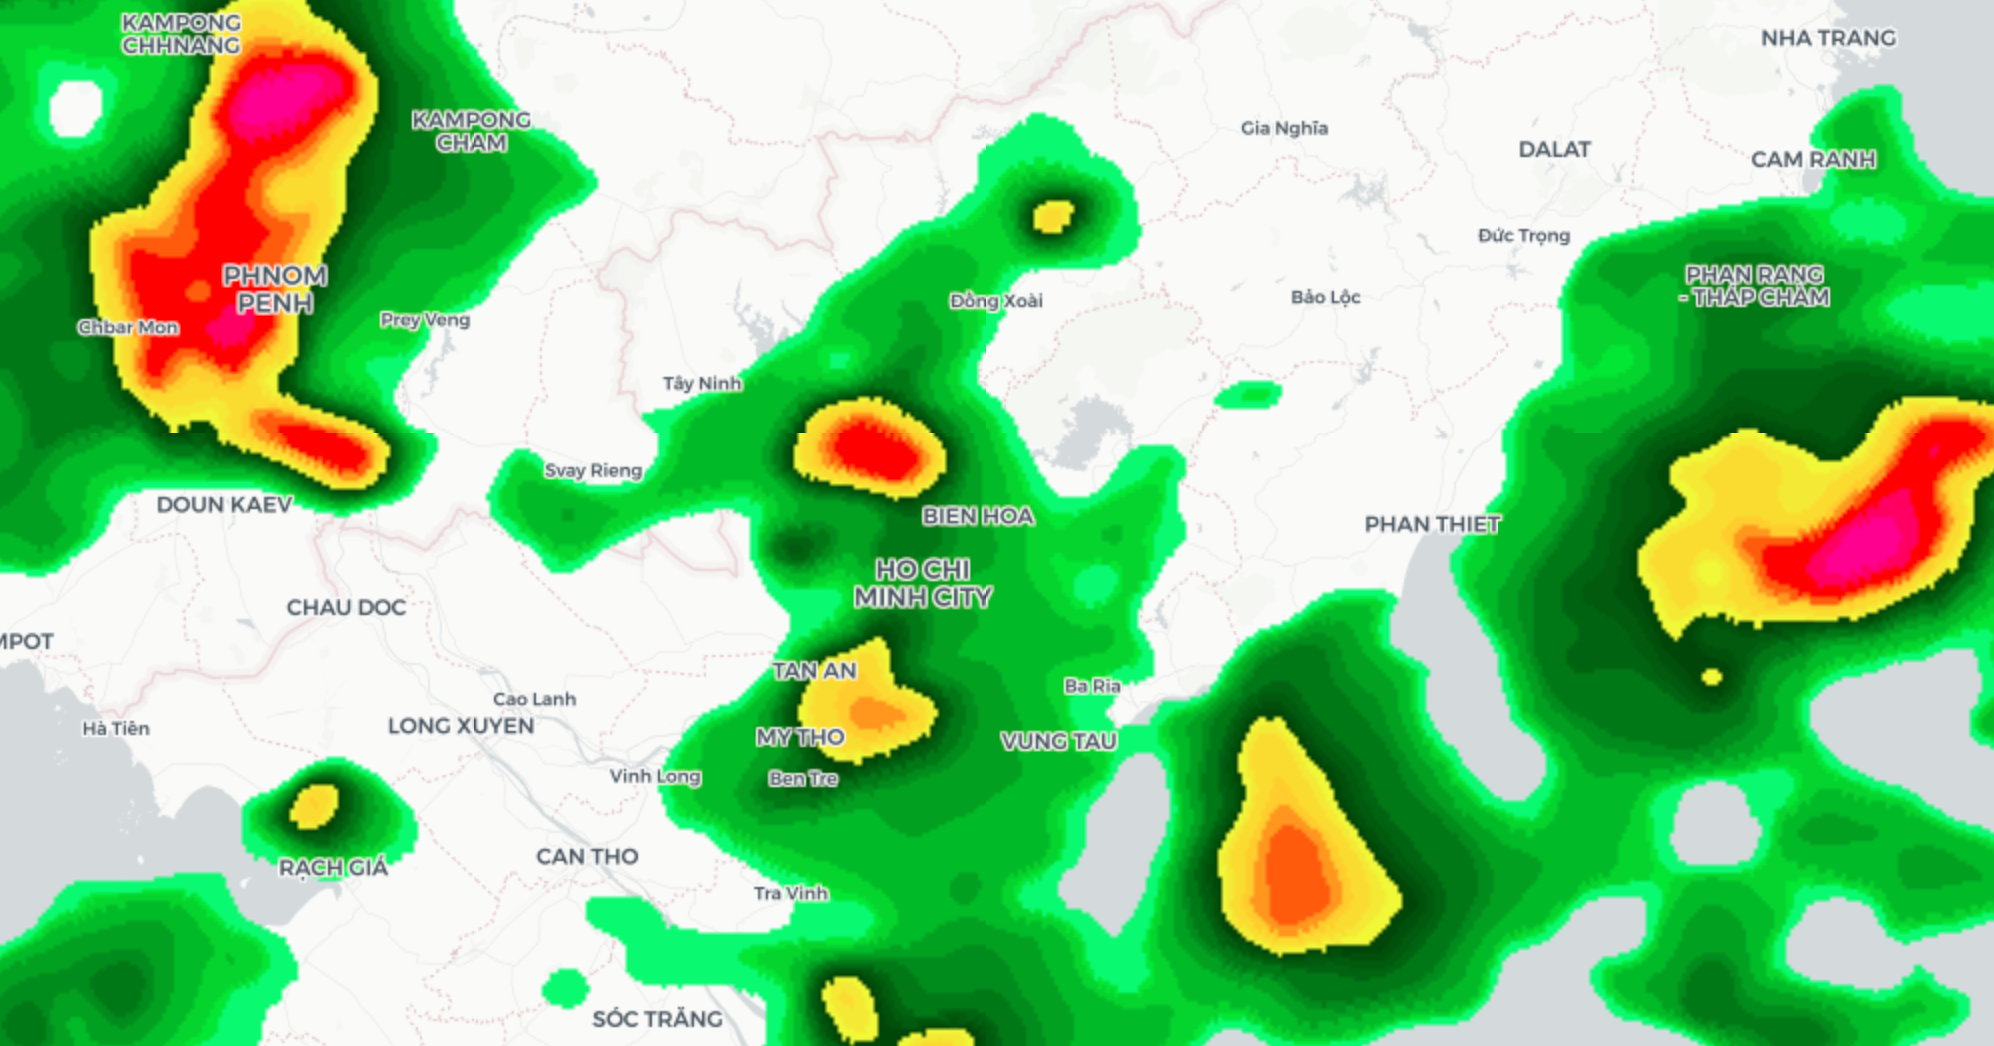 Light up your app with the beautiful rain maps with 10 minute step API